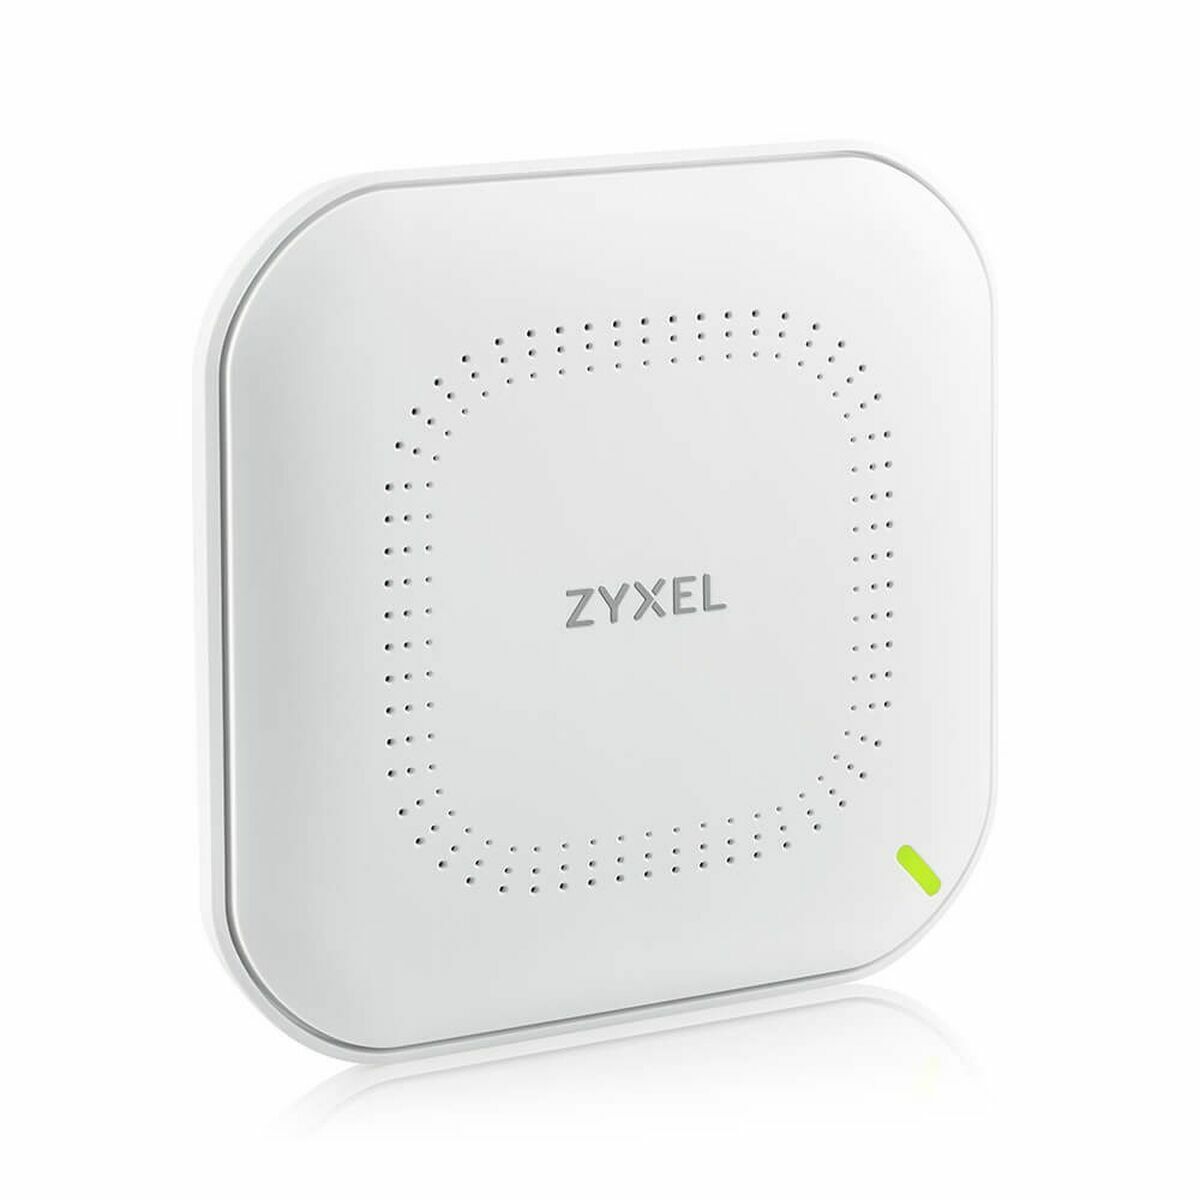 Access point ZyXEL NWA50AXPRO-EU0102F White, ZyXEL, Computing, Network devices, access-point-zyxel-nwa50axpro-eu0102f-white, Brand_ZyXEL, category-reference-2609, category-reference-2803, category-reference-2820, category-reference-t-19685, category-reference-t-19914, category-reference-t-21369, Condition_NEW, networks/wiring, Price_100 - 200, Teleworking, RiotNook